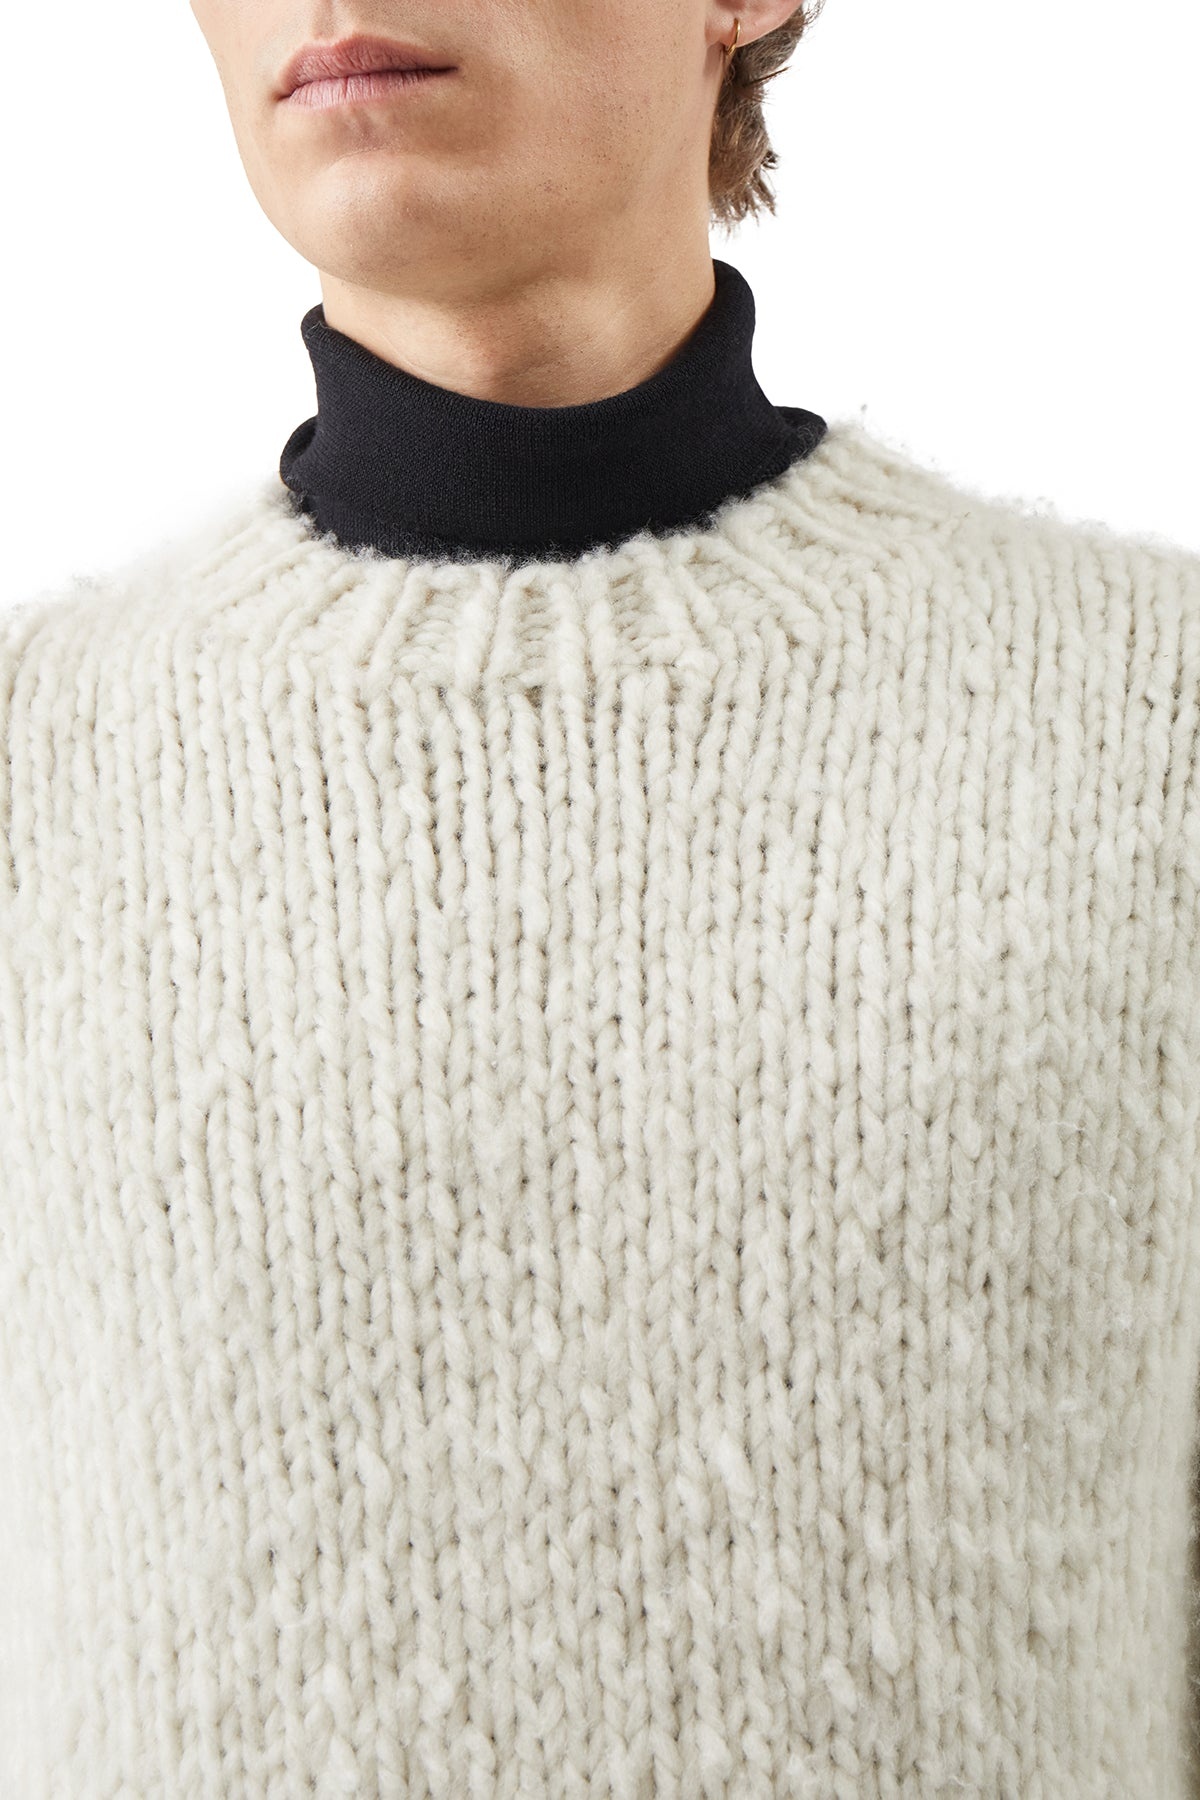 Lawrence Knit Sweater in Ivory Welfat Cashmere - 5